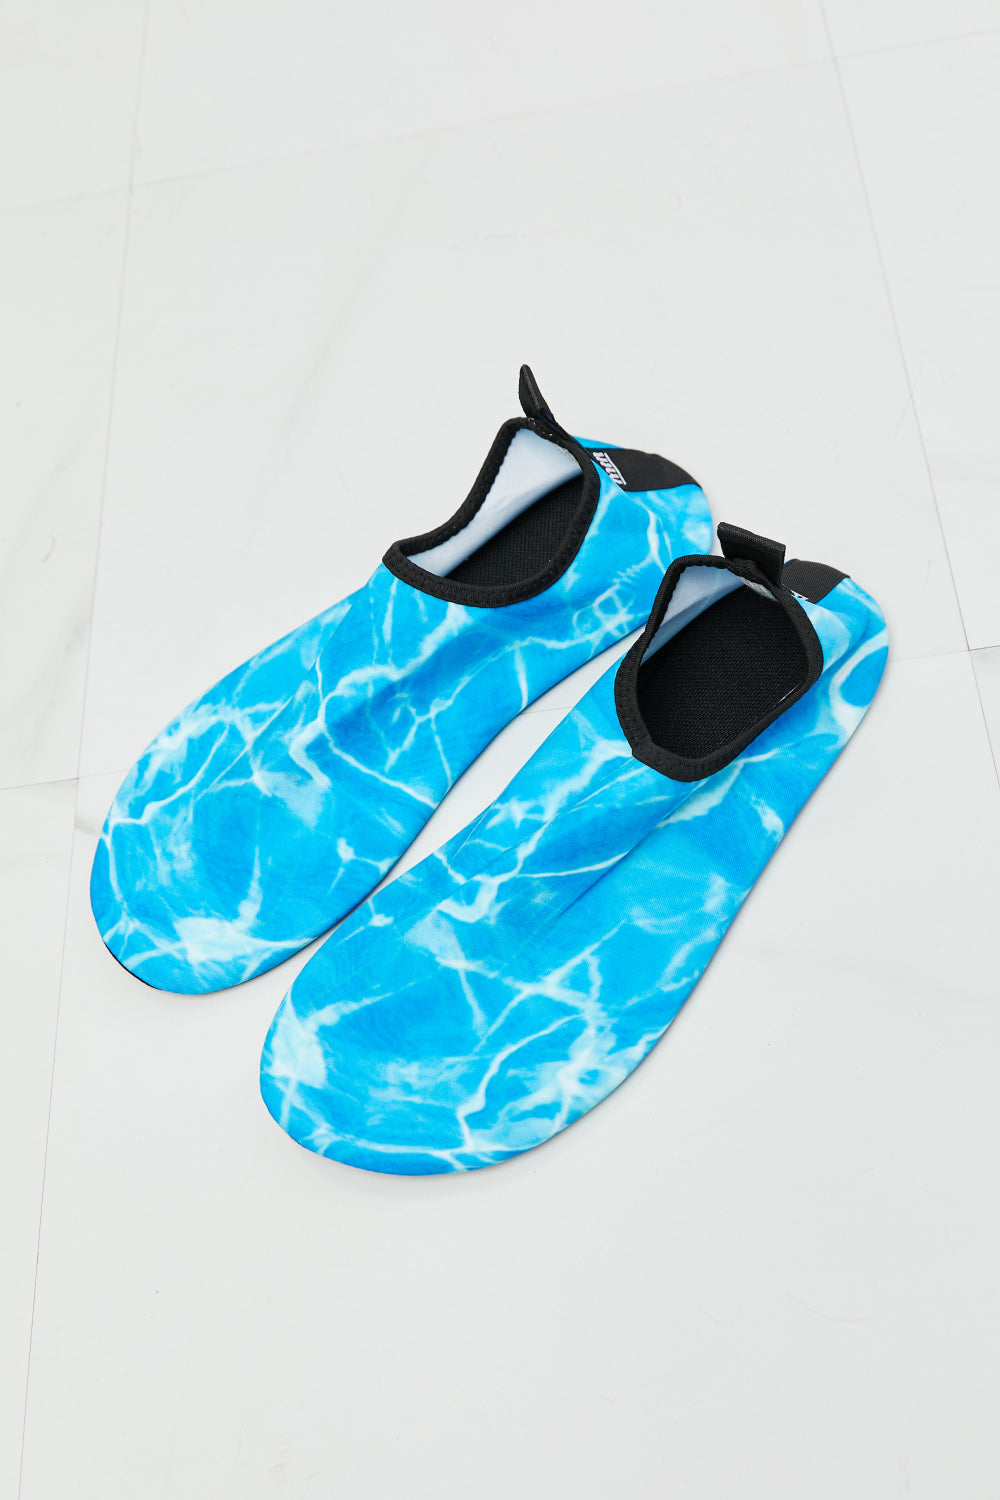 MMshoes On The Shore Water Shoes in Sky Blue - AllIn Computer